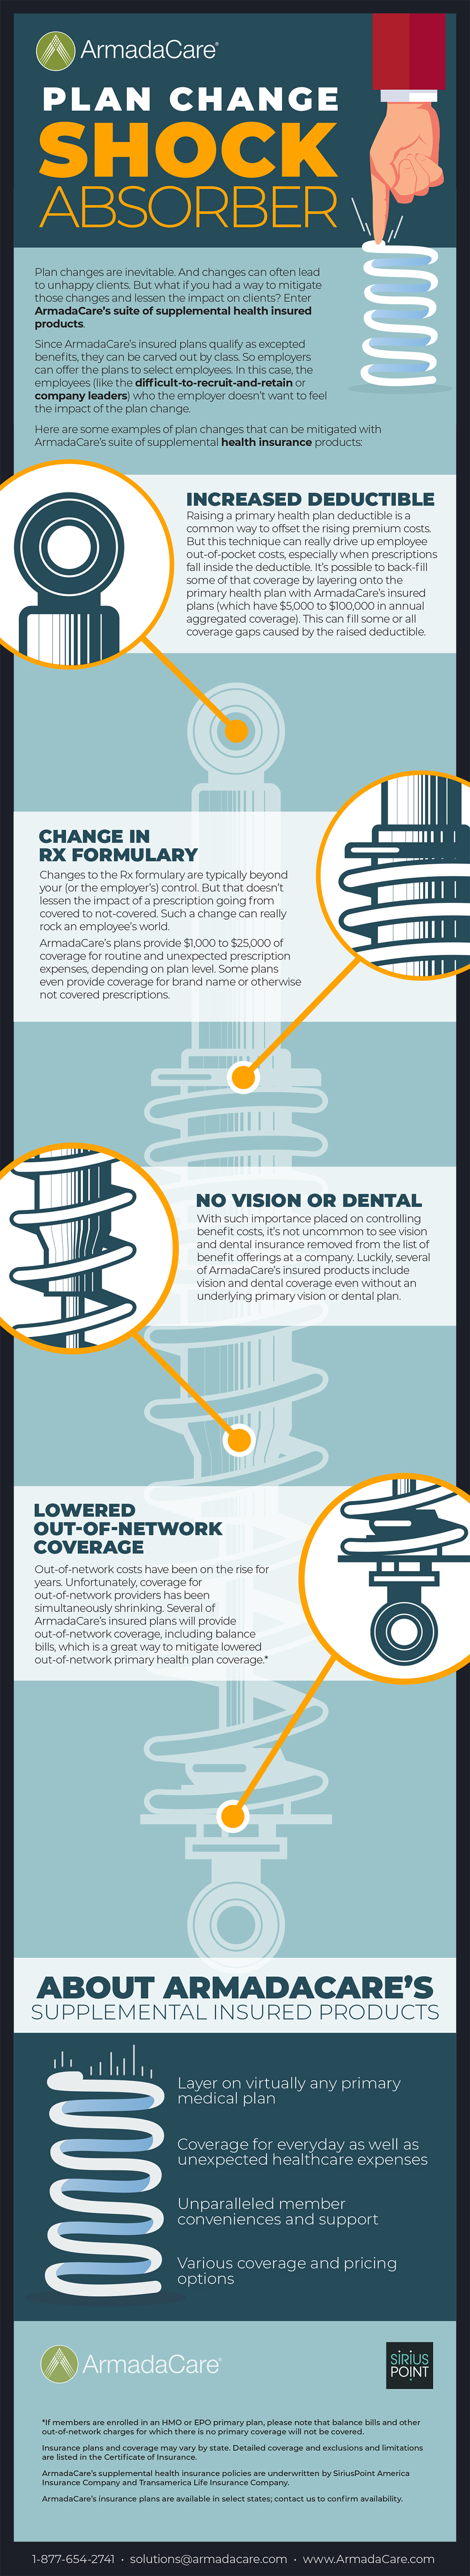 Plan Change Shock Absorber Infographic, ArmadaCare